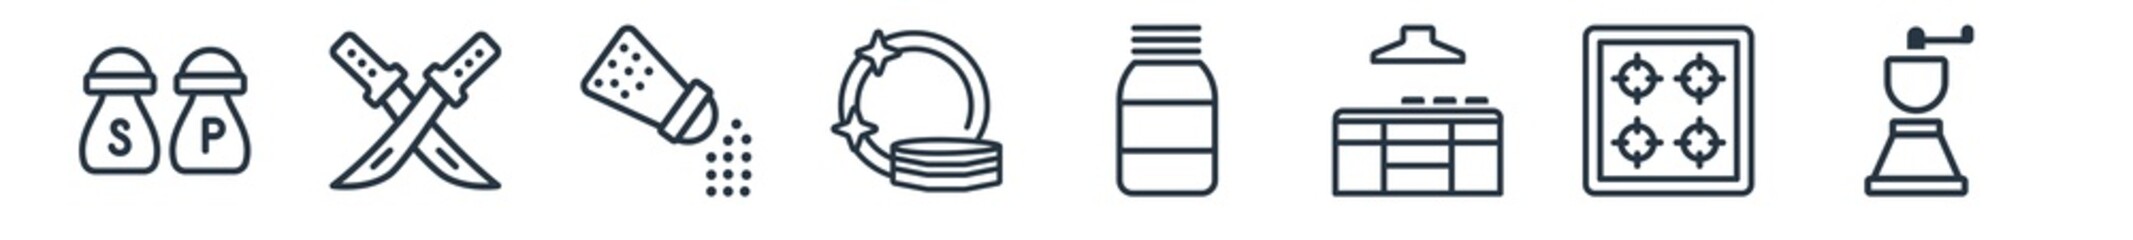 linear set of kitchen outline icons. line vector icons such as salt and pepper, knives, seasoning, dishes, jar, coffee grinder vector illustration.